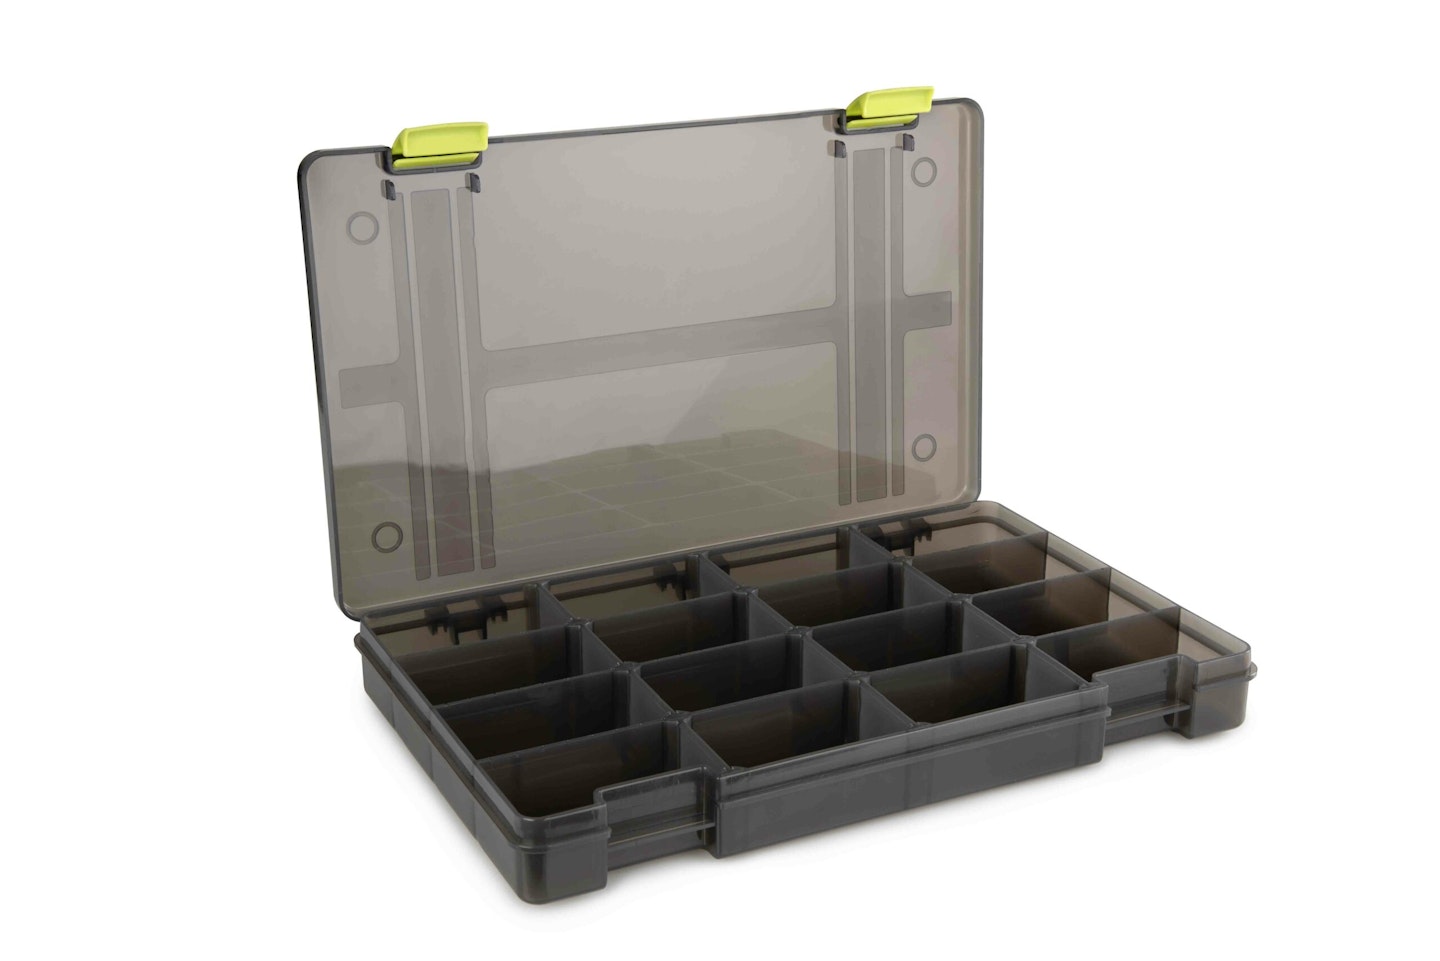 12 Great tackle boxes and storage systems